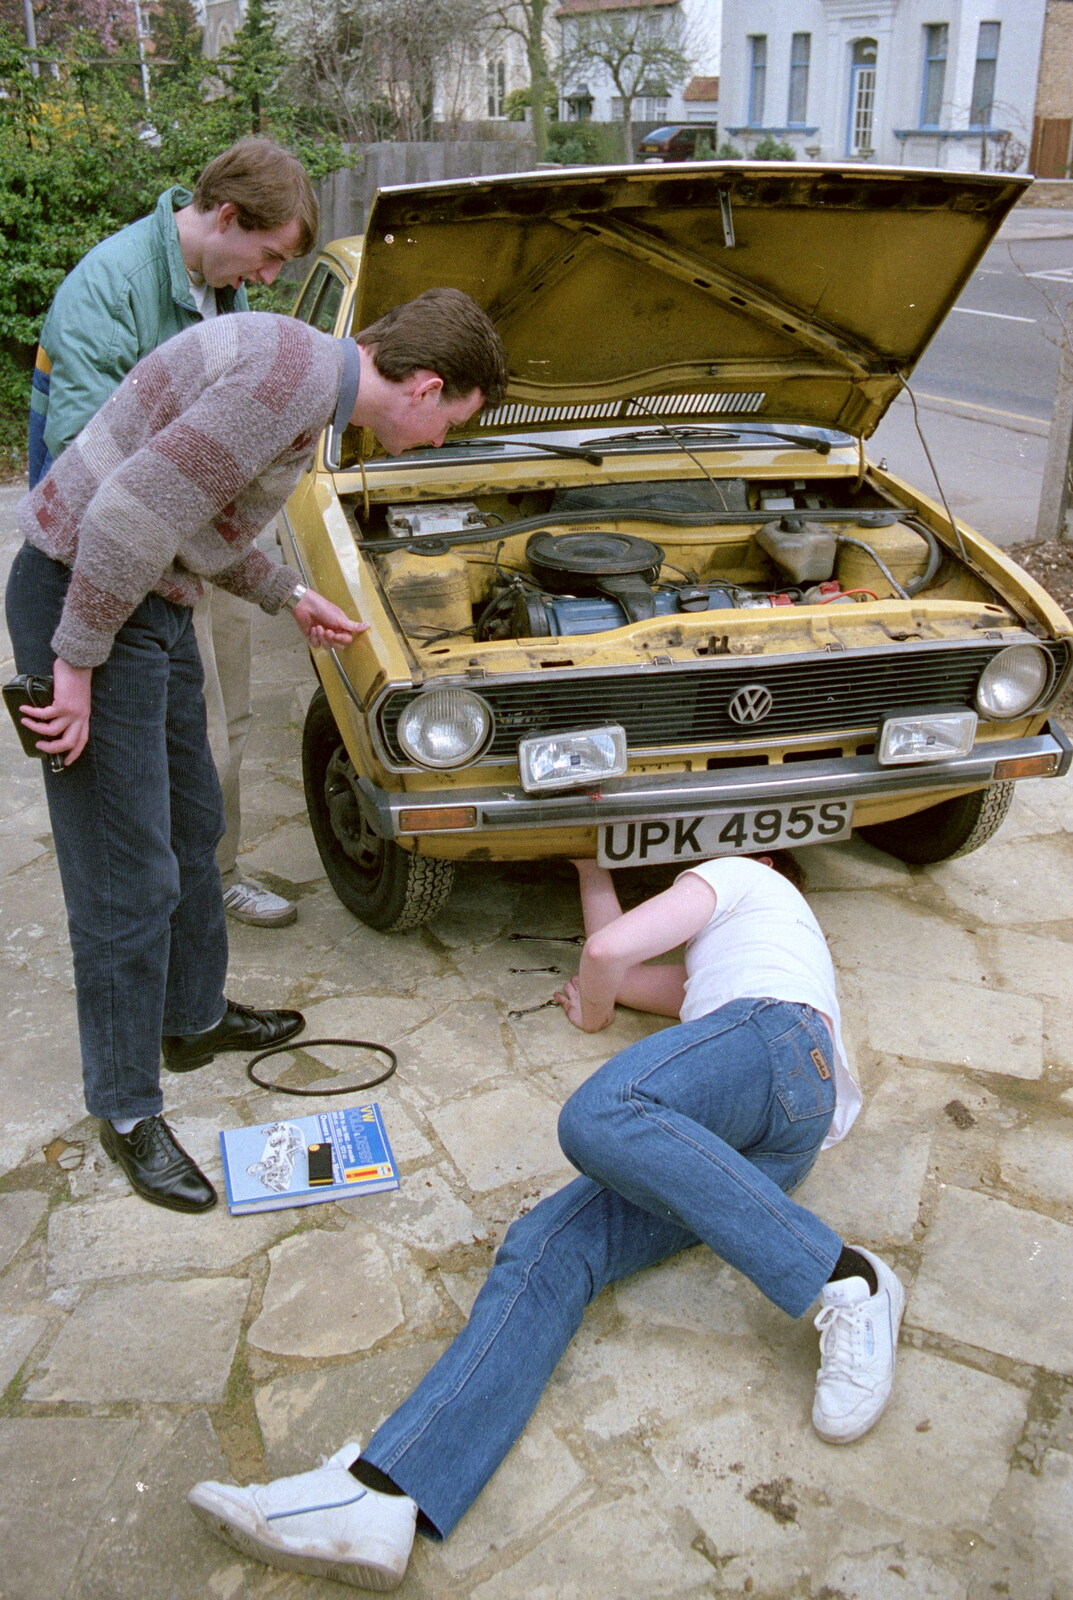 More rummaging under the engine from Trotsky's Birthday, New Malden, Kingston Upon Thames - 20th April 1986